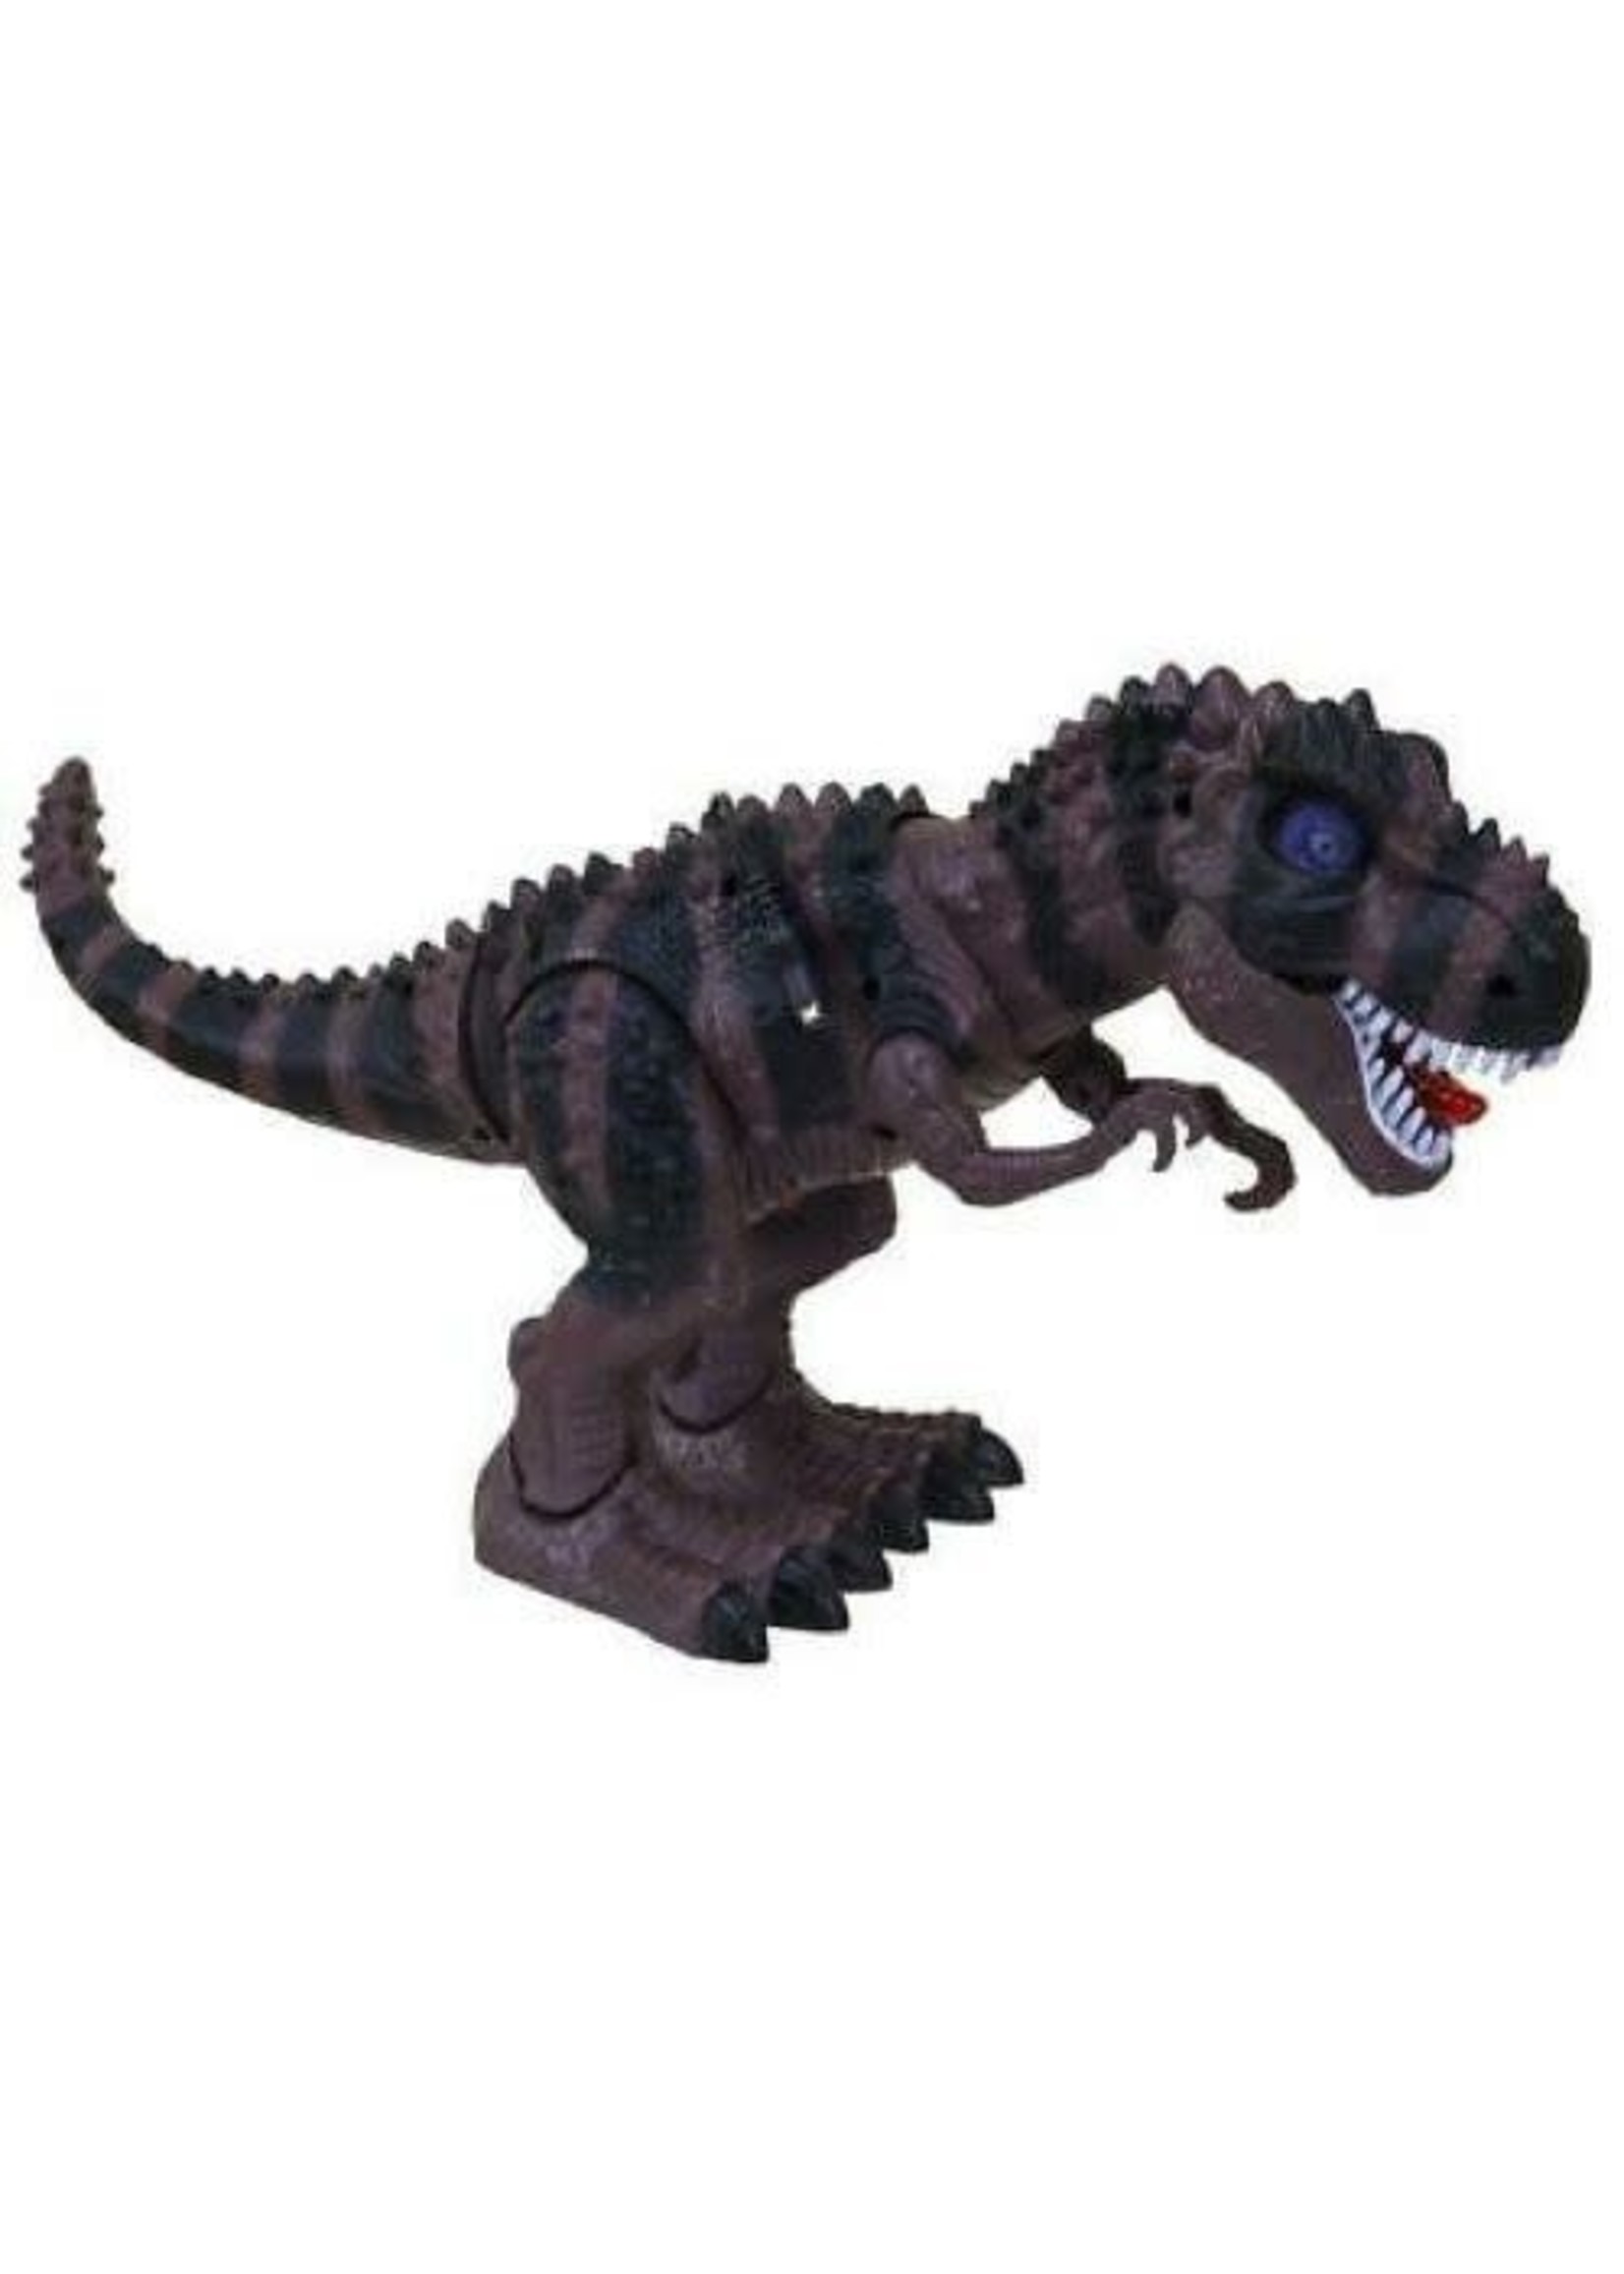 ABC Trading Inc. Gino Dino Spinning Moving TRex Action Toy